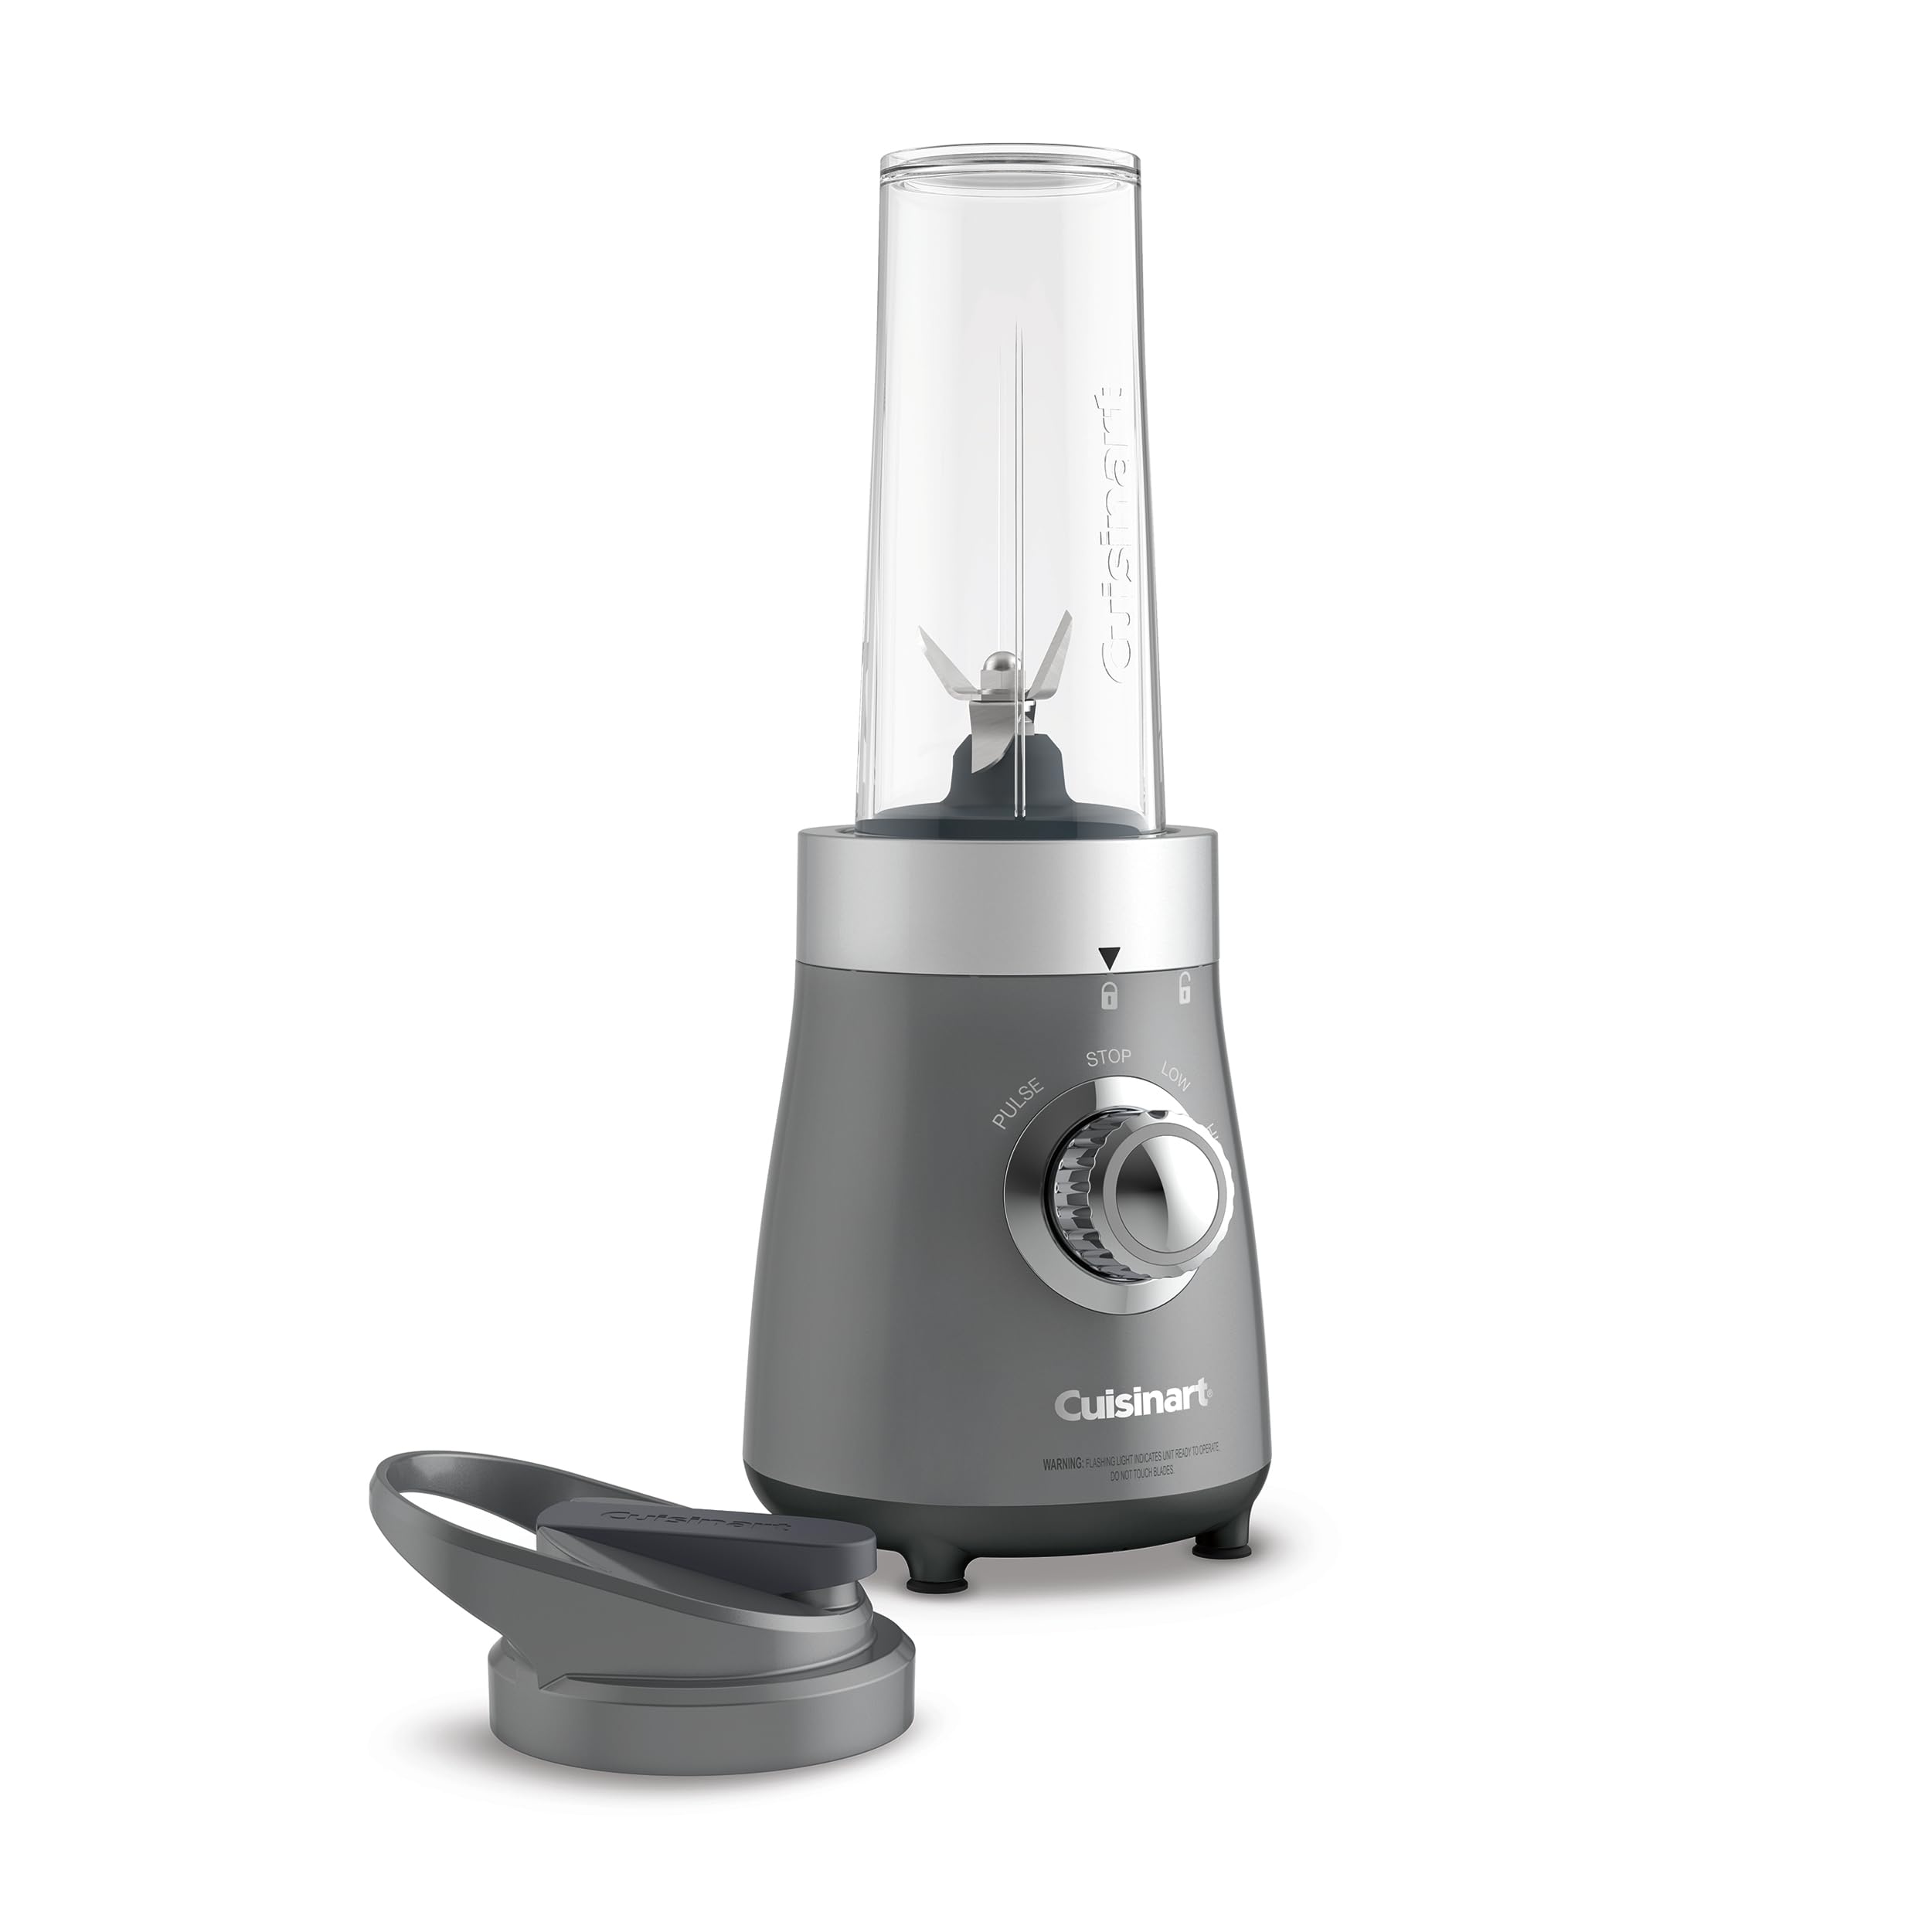 Cuisinart Compact Blender and Juicer Combo, One Size, Stainless Steel